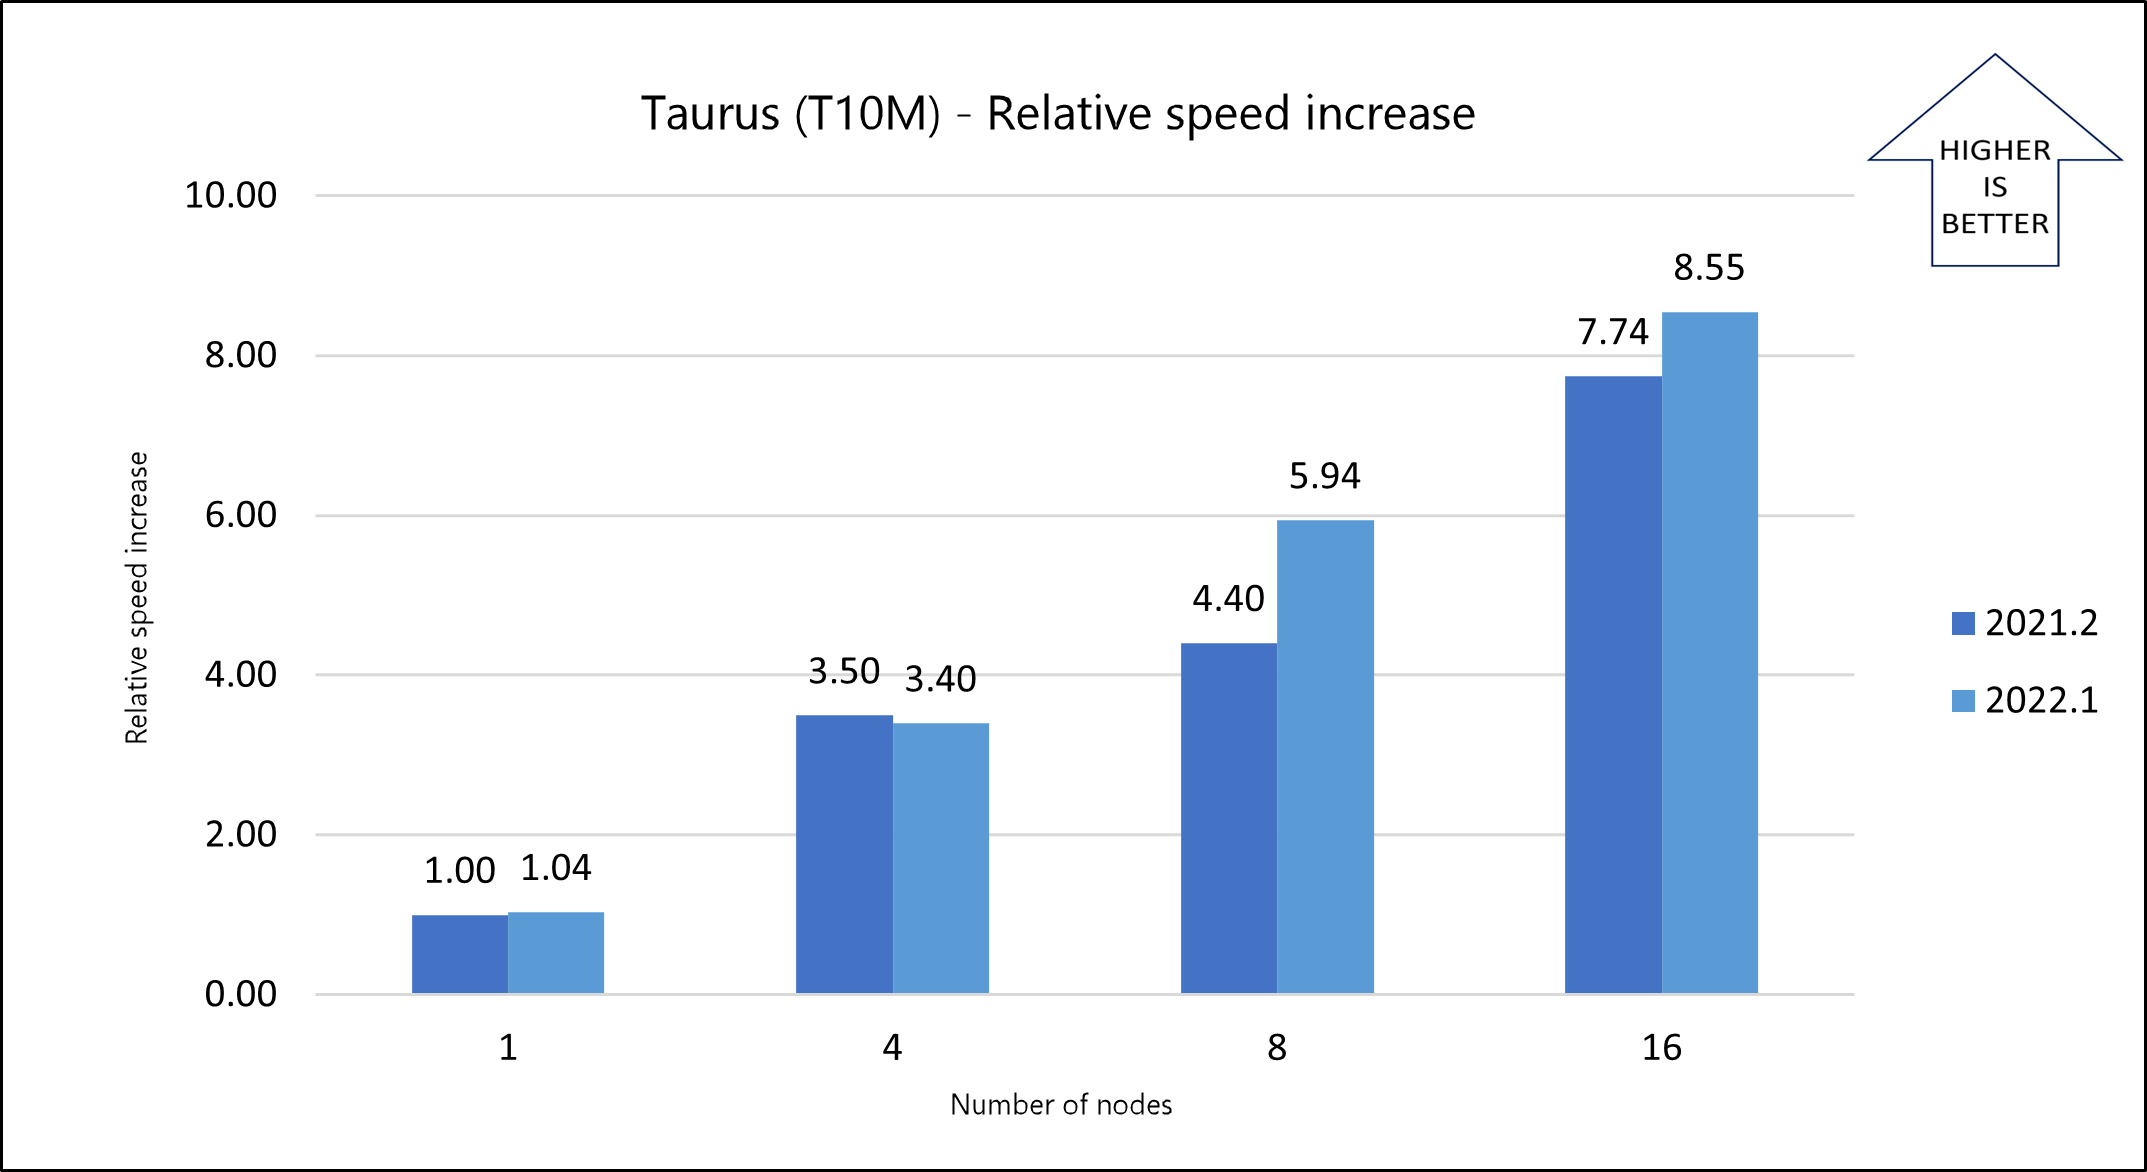 Graph that shows the relative speed increase for the Taurus model.